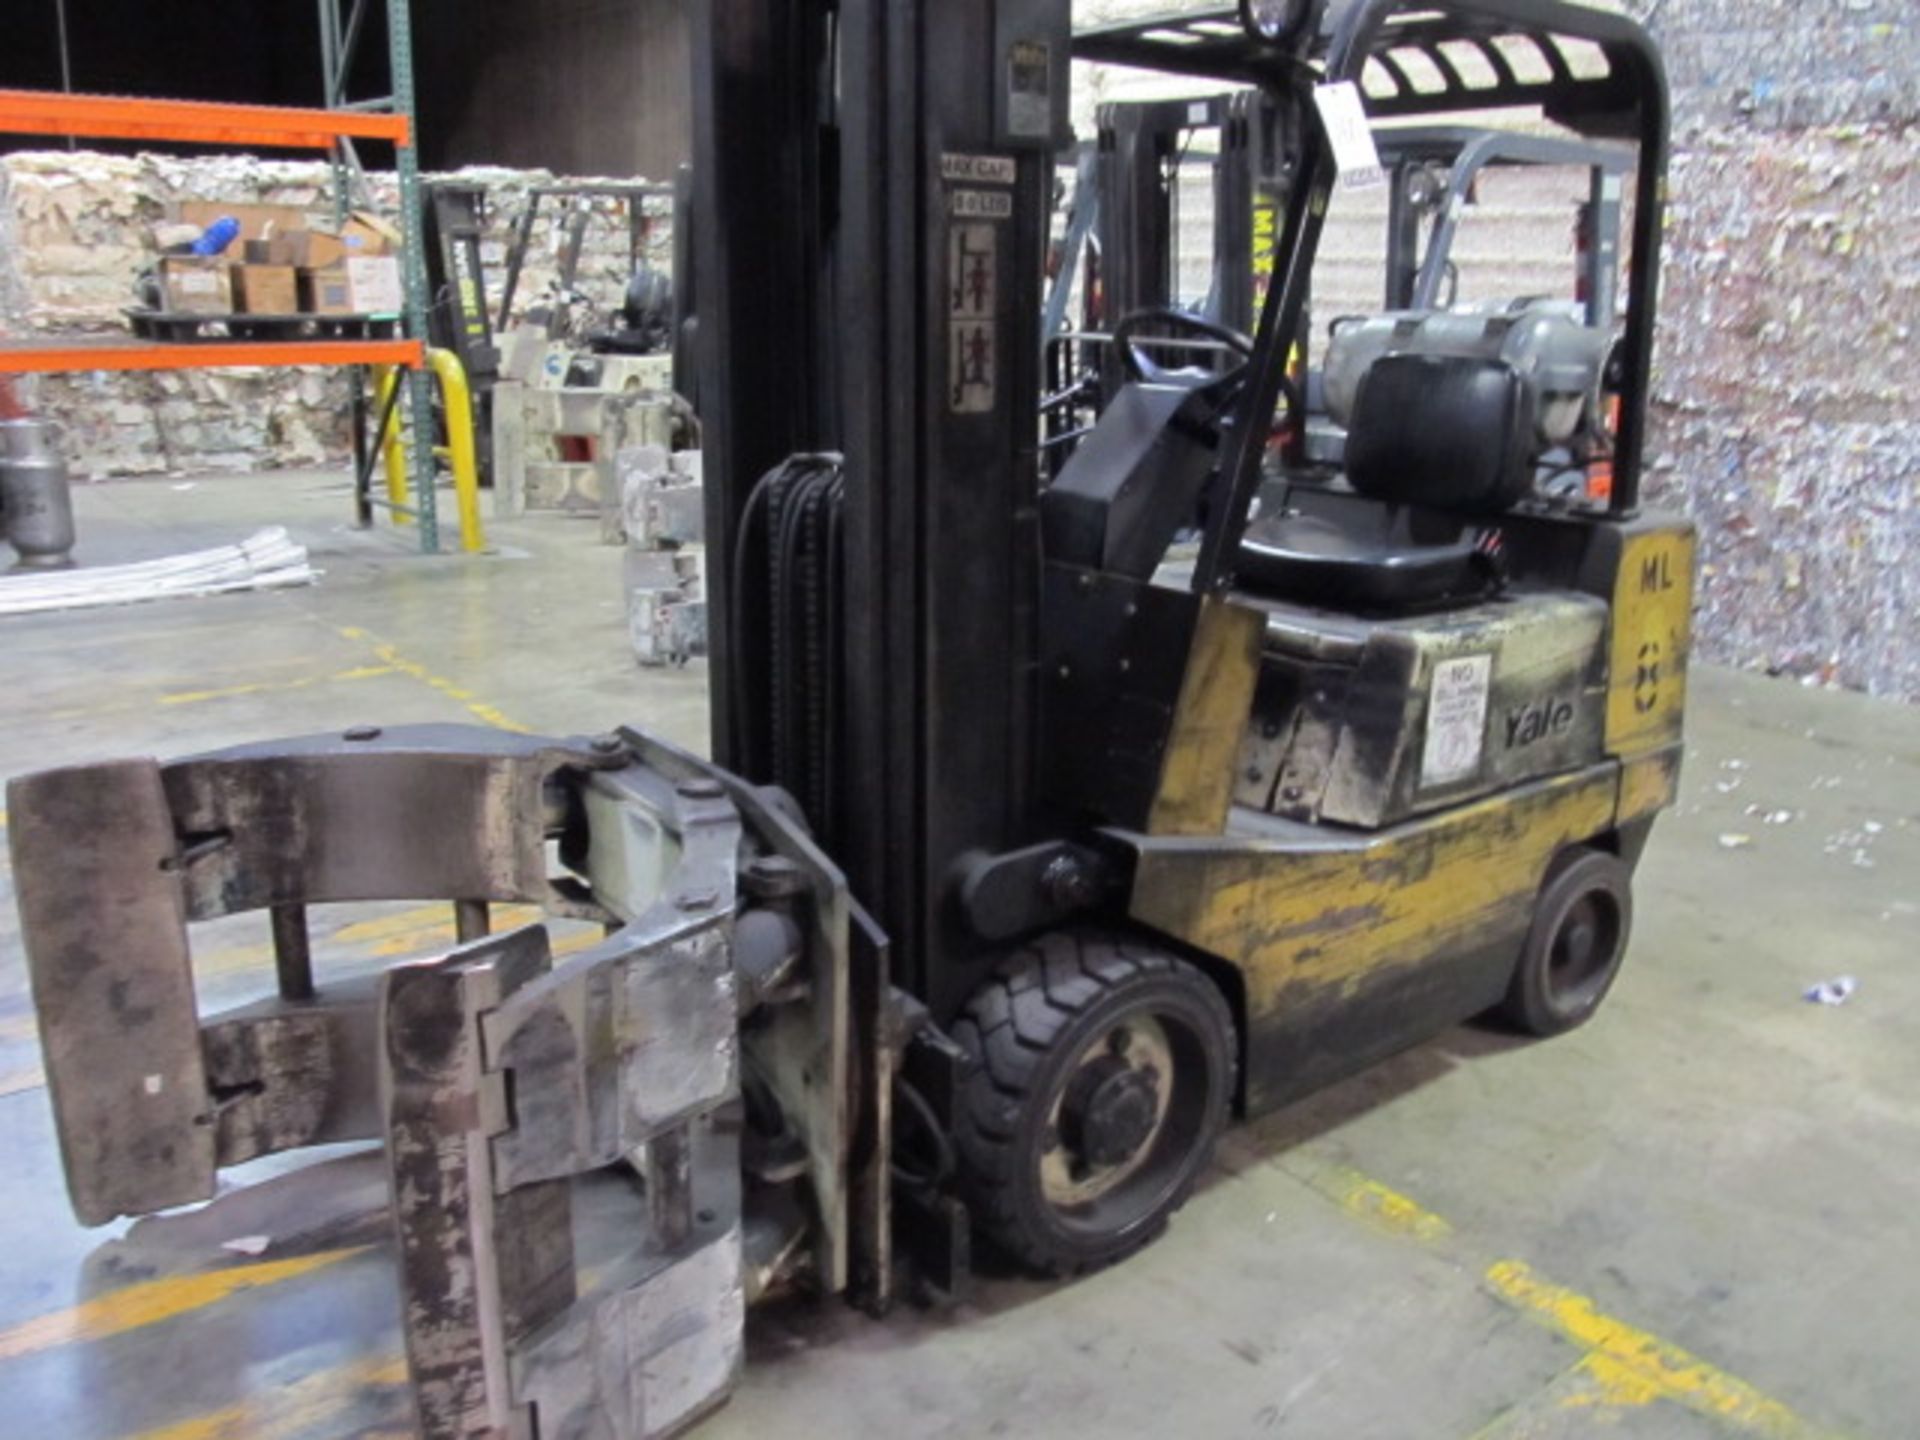 Nissan Fork Lift With Roll Clamp, 2 Stage Mast, 4500lb Capacity, 10,186 Hours, Model CLC050RDJNLE083